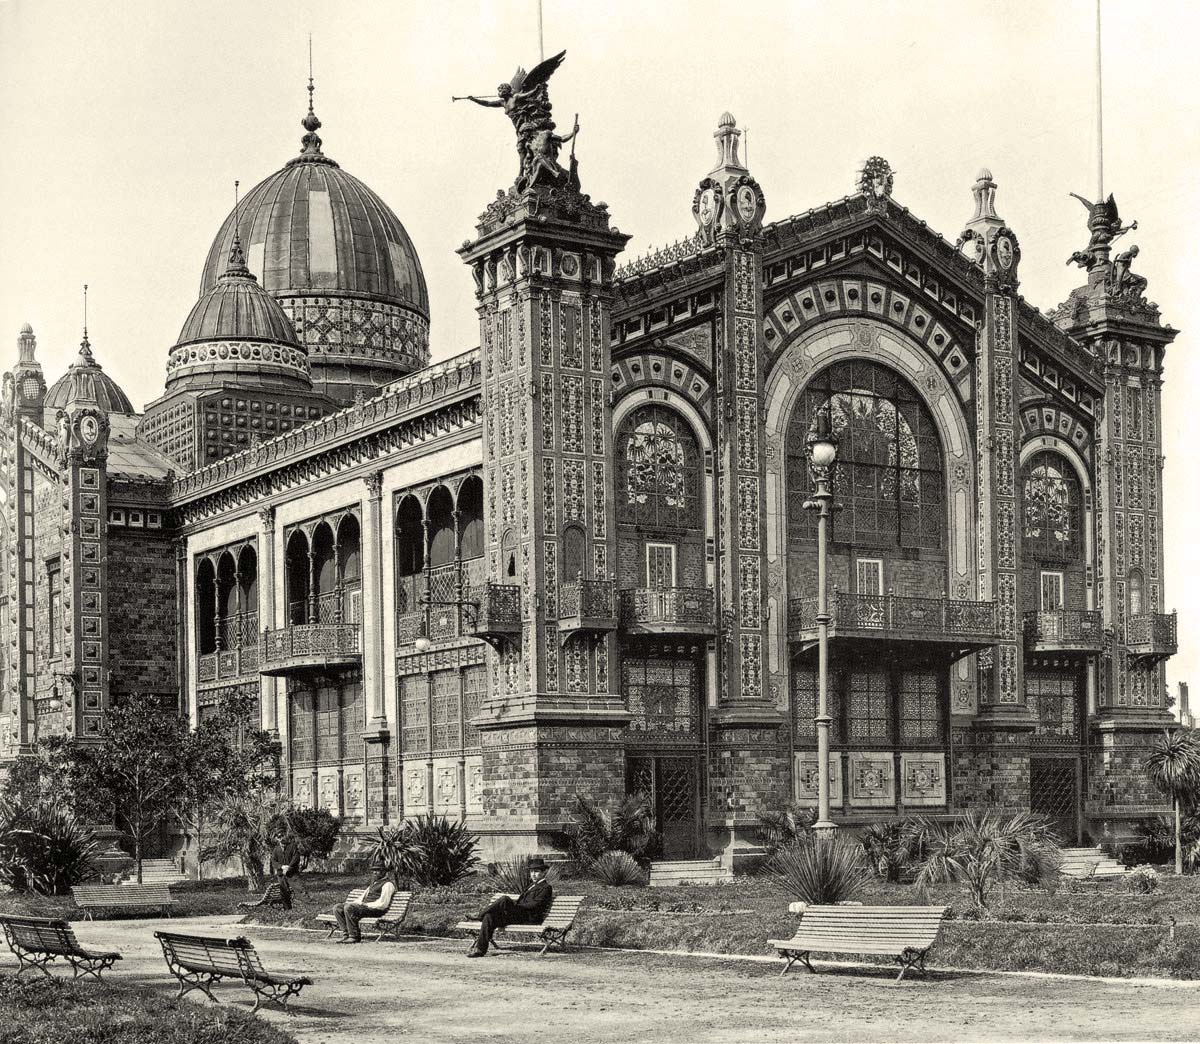 Buenos Aires. The Argentine Pavillion built specially for the Exposition Universelle of Paris, 1889